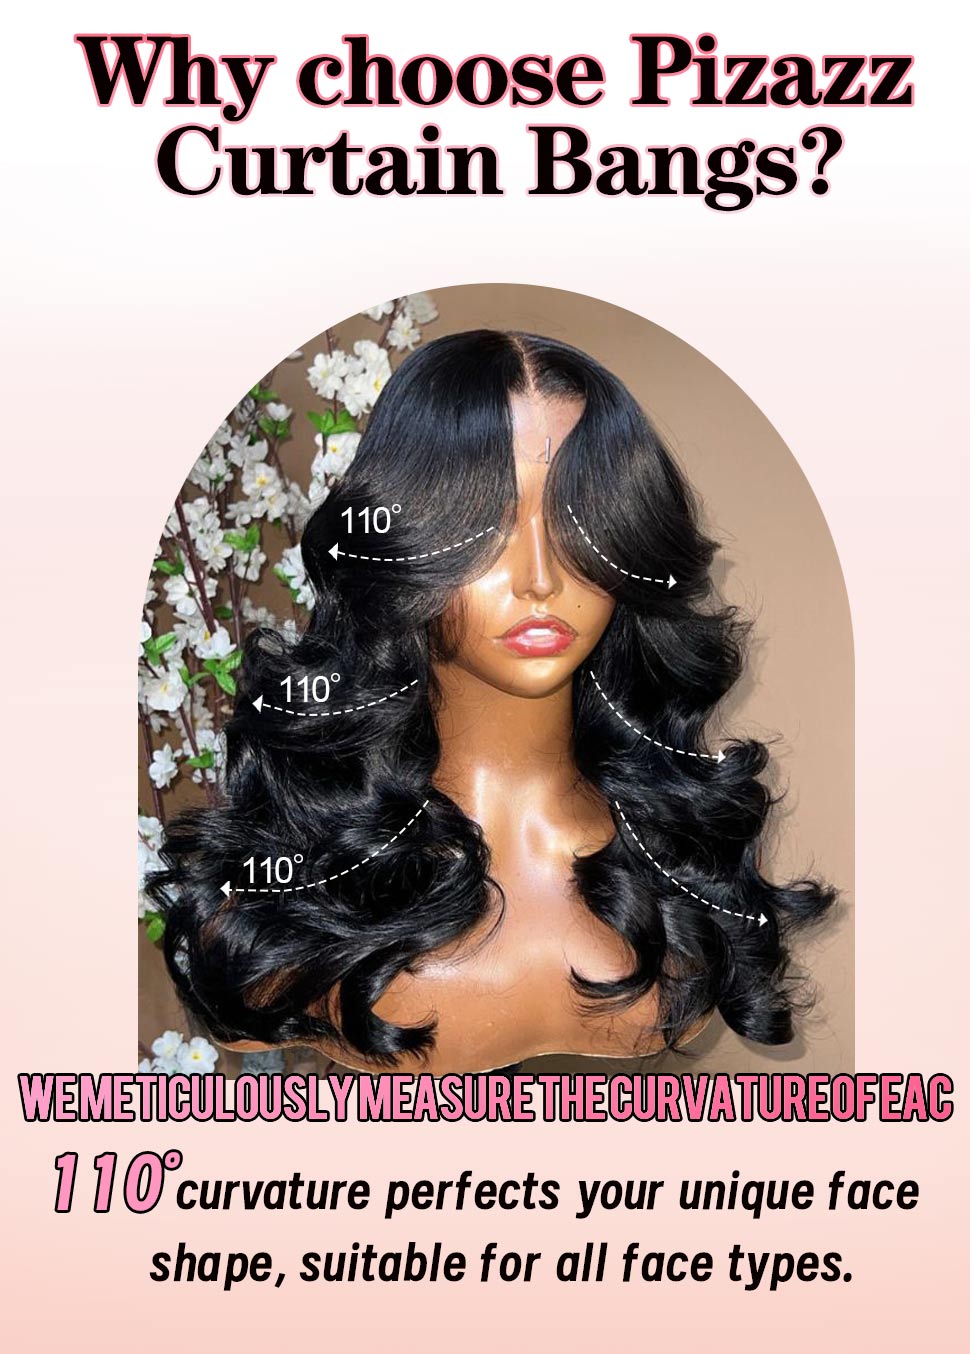 curtain bangs body wave hd lace wigs